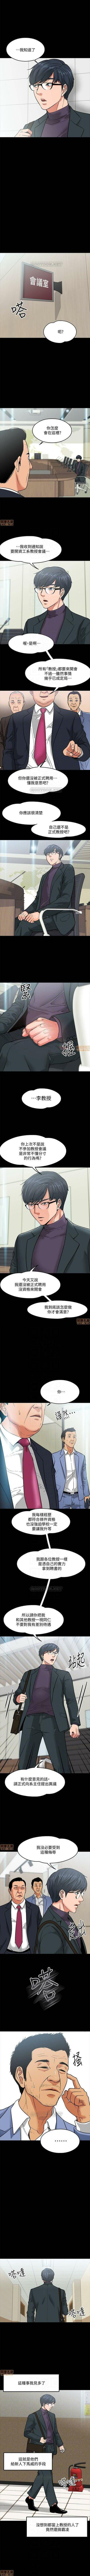 PROFESSOR, ARE YOU JUST GOING TO LOOK AT ME? | DESIRE SWAMP | 教授，你還等什麼? Ch. 3Manhwa 4